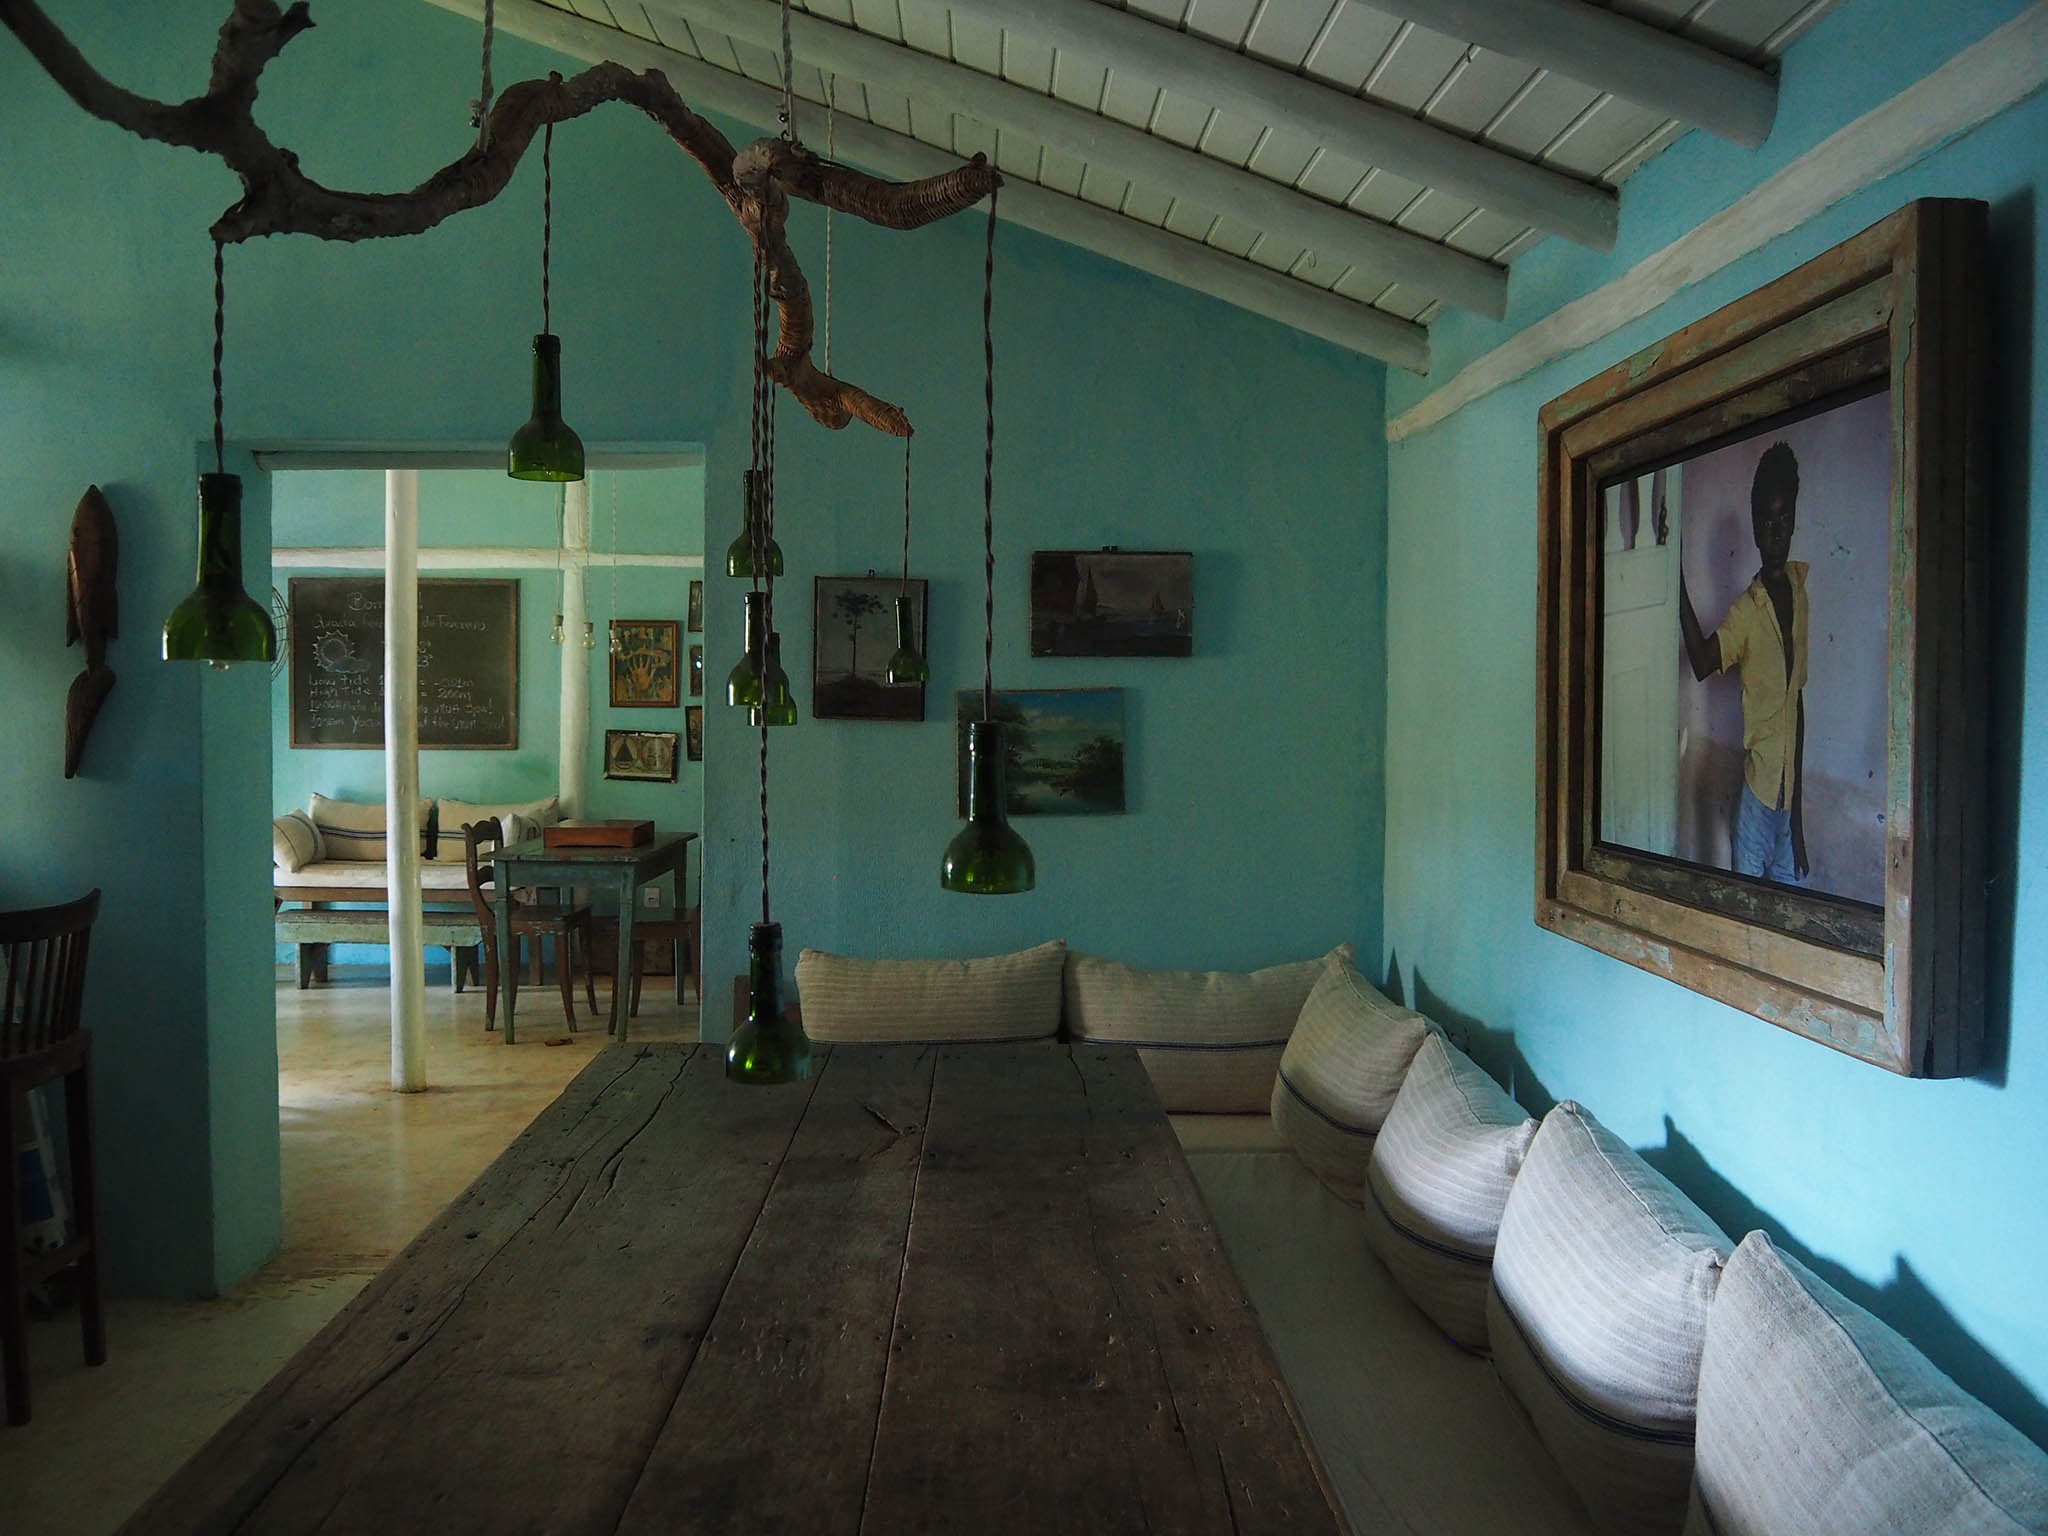 Turquoise coloured walls, reminiscent of the water colour, sets the perfect tone to showcase work from a wide range of Brazilian artisans at the UXUA Casa Hotel in Trancoso